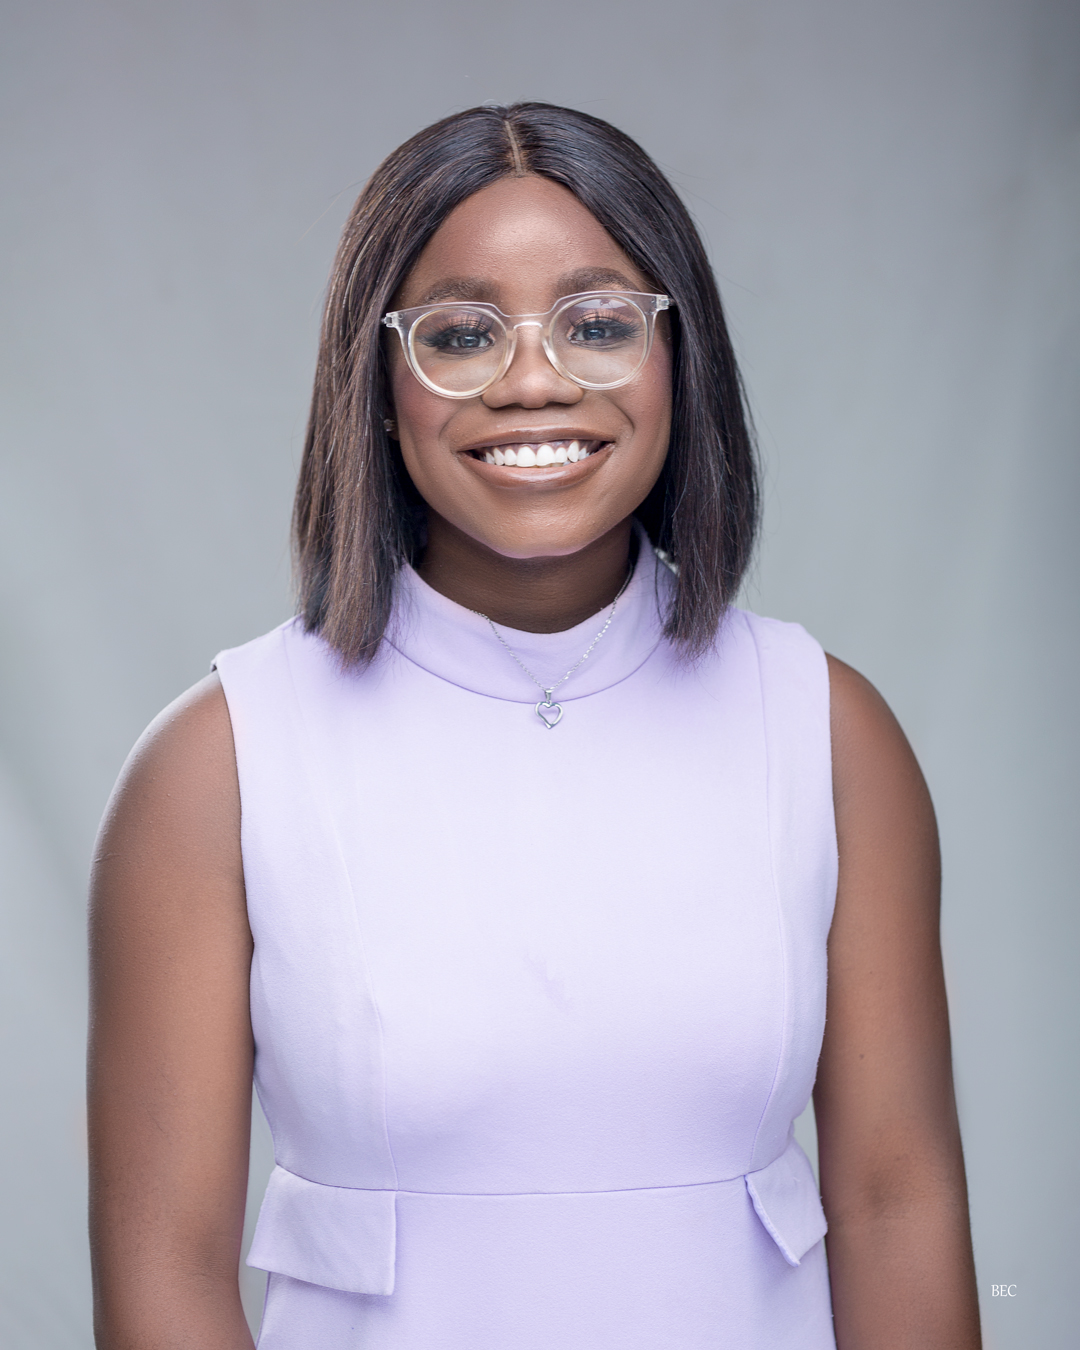 /></figure>
<p></p>
<p></p>
<p>Martins Favour <em>is a creative content writer with over five years of experience writing SEO content for various brands. She finds a home in weaving worlds out of words. Stories are her life and </em><a href=